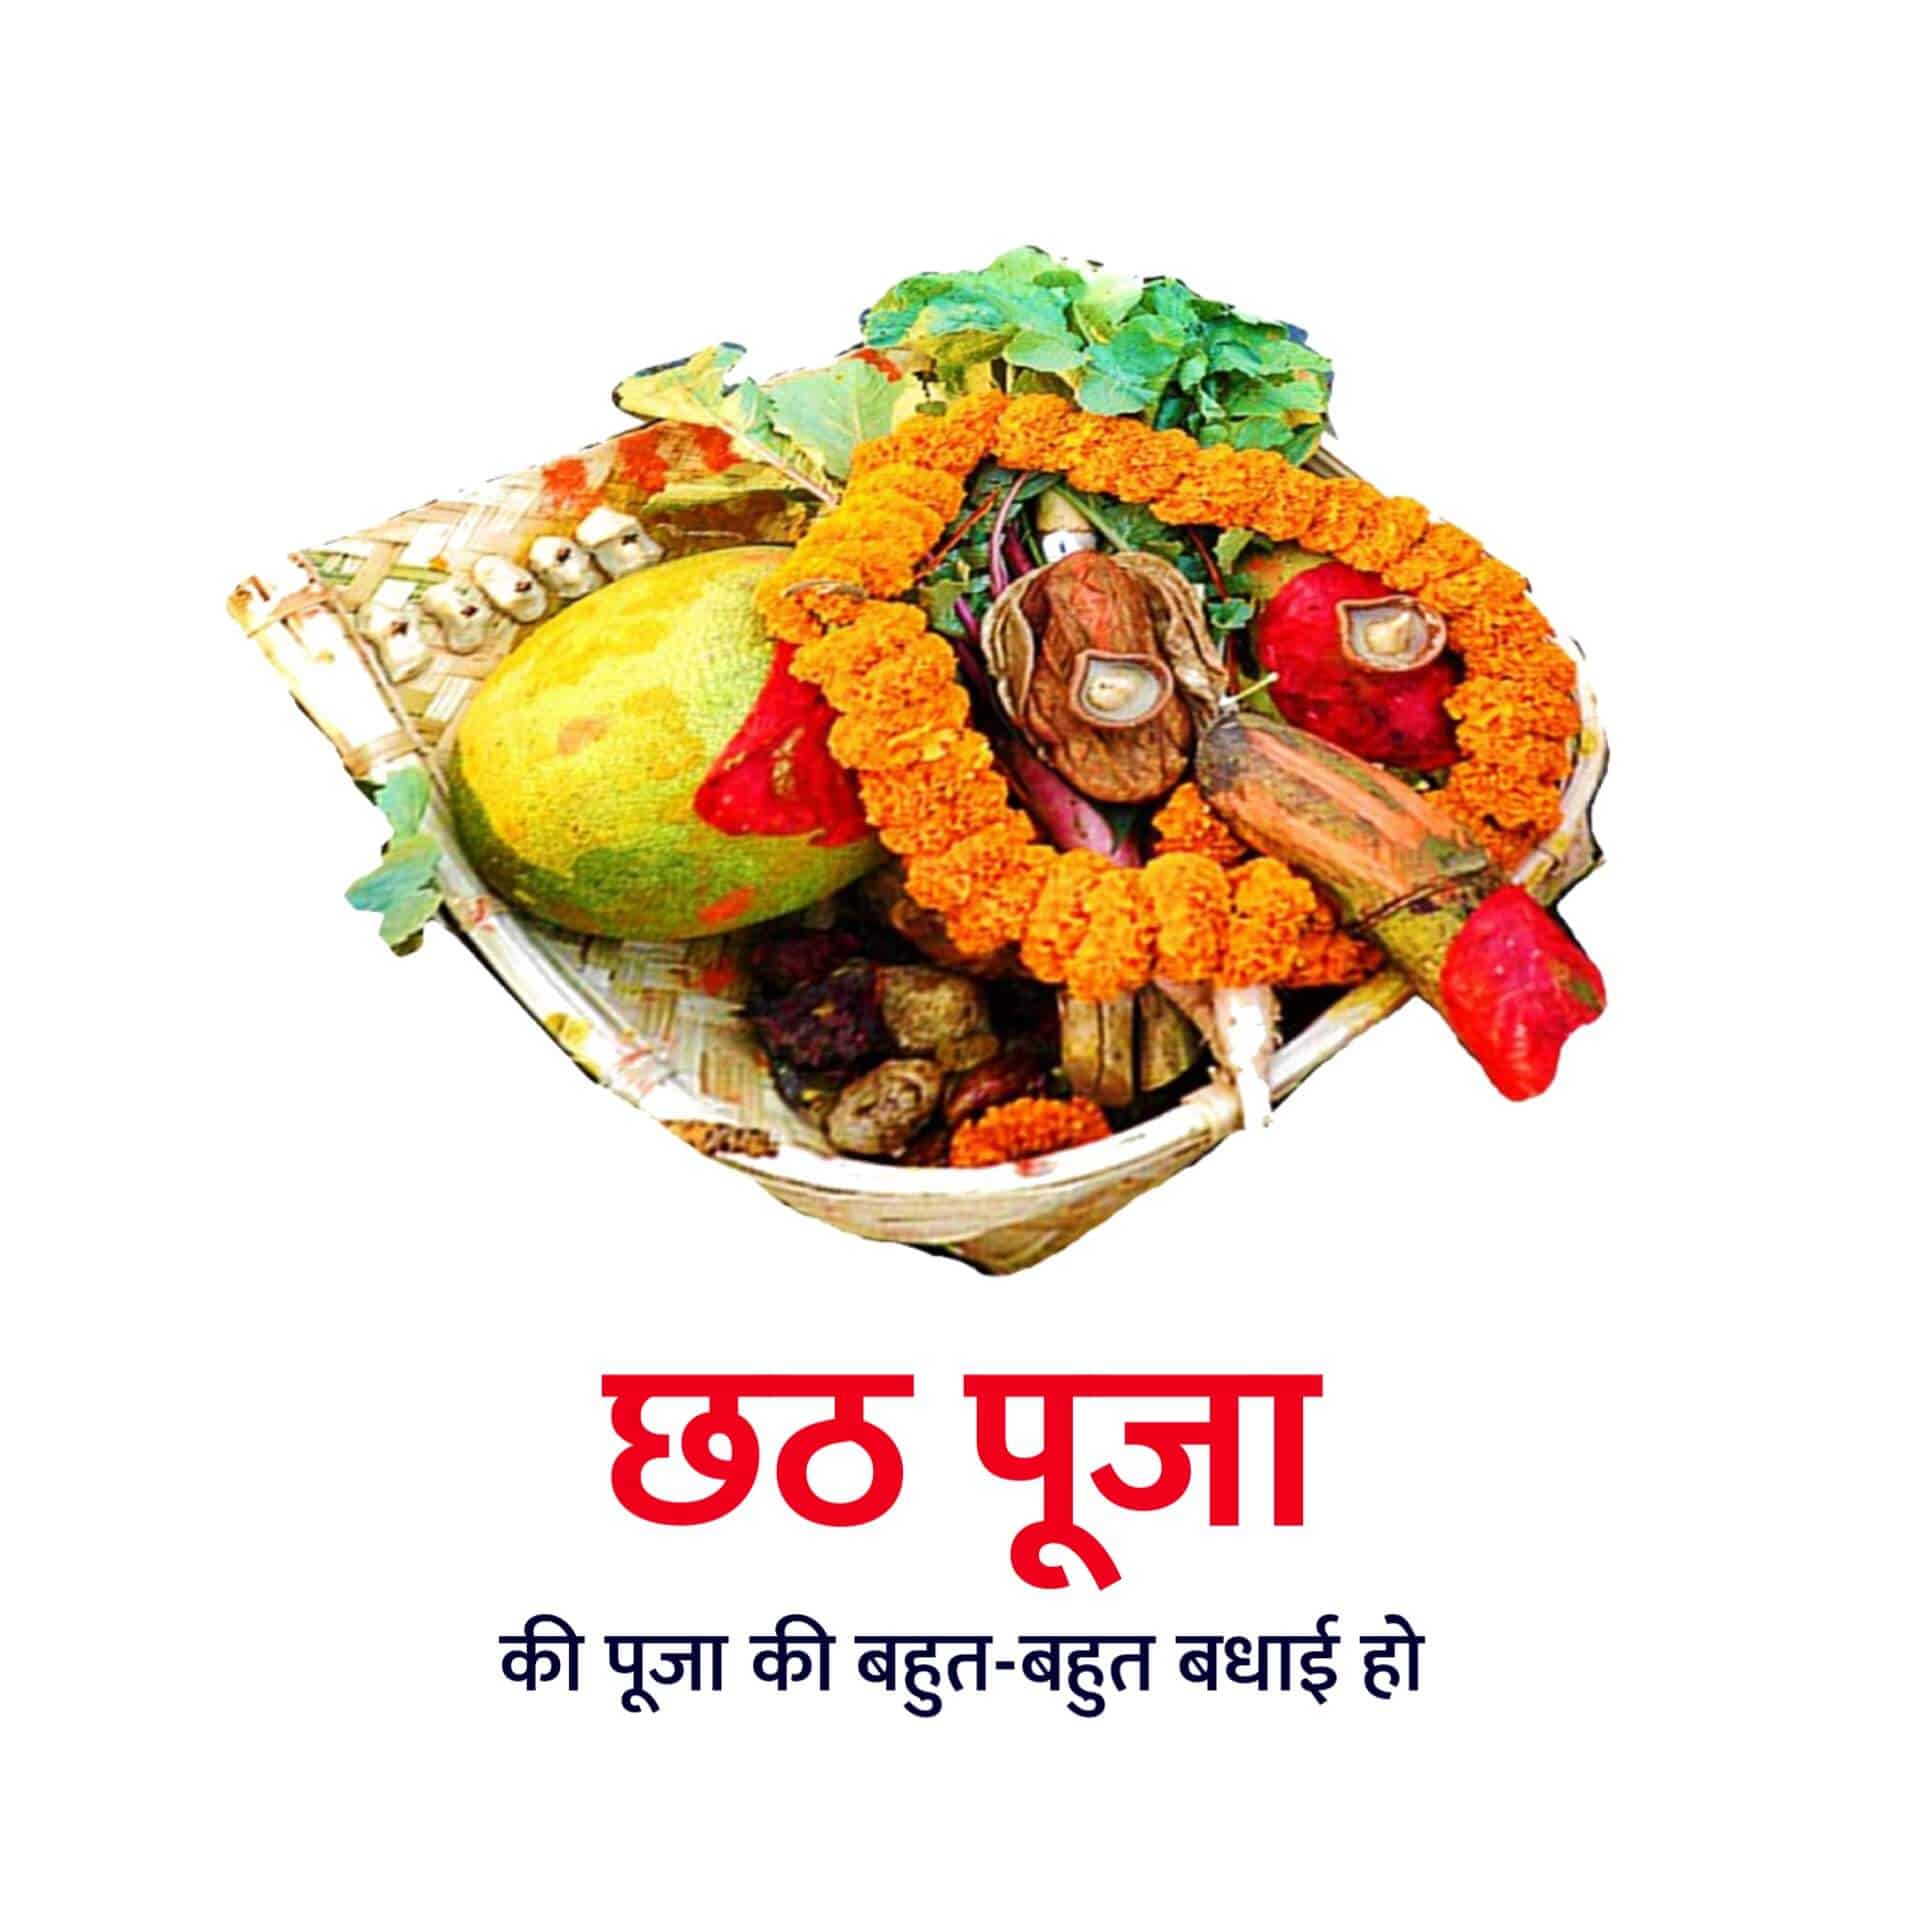 Chhath Puja Images HD